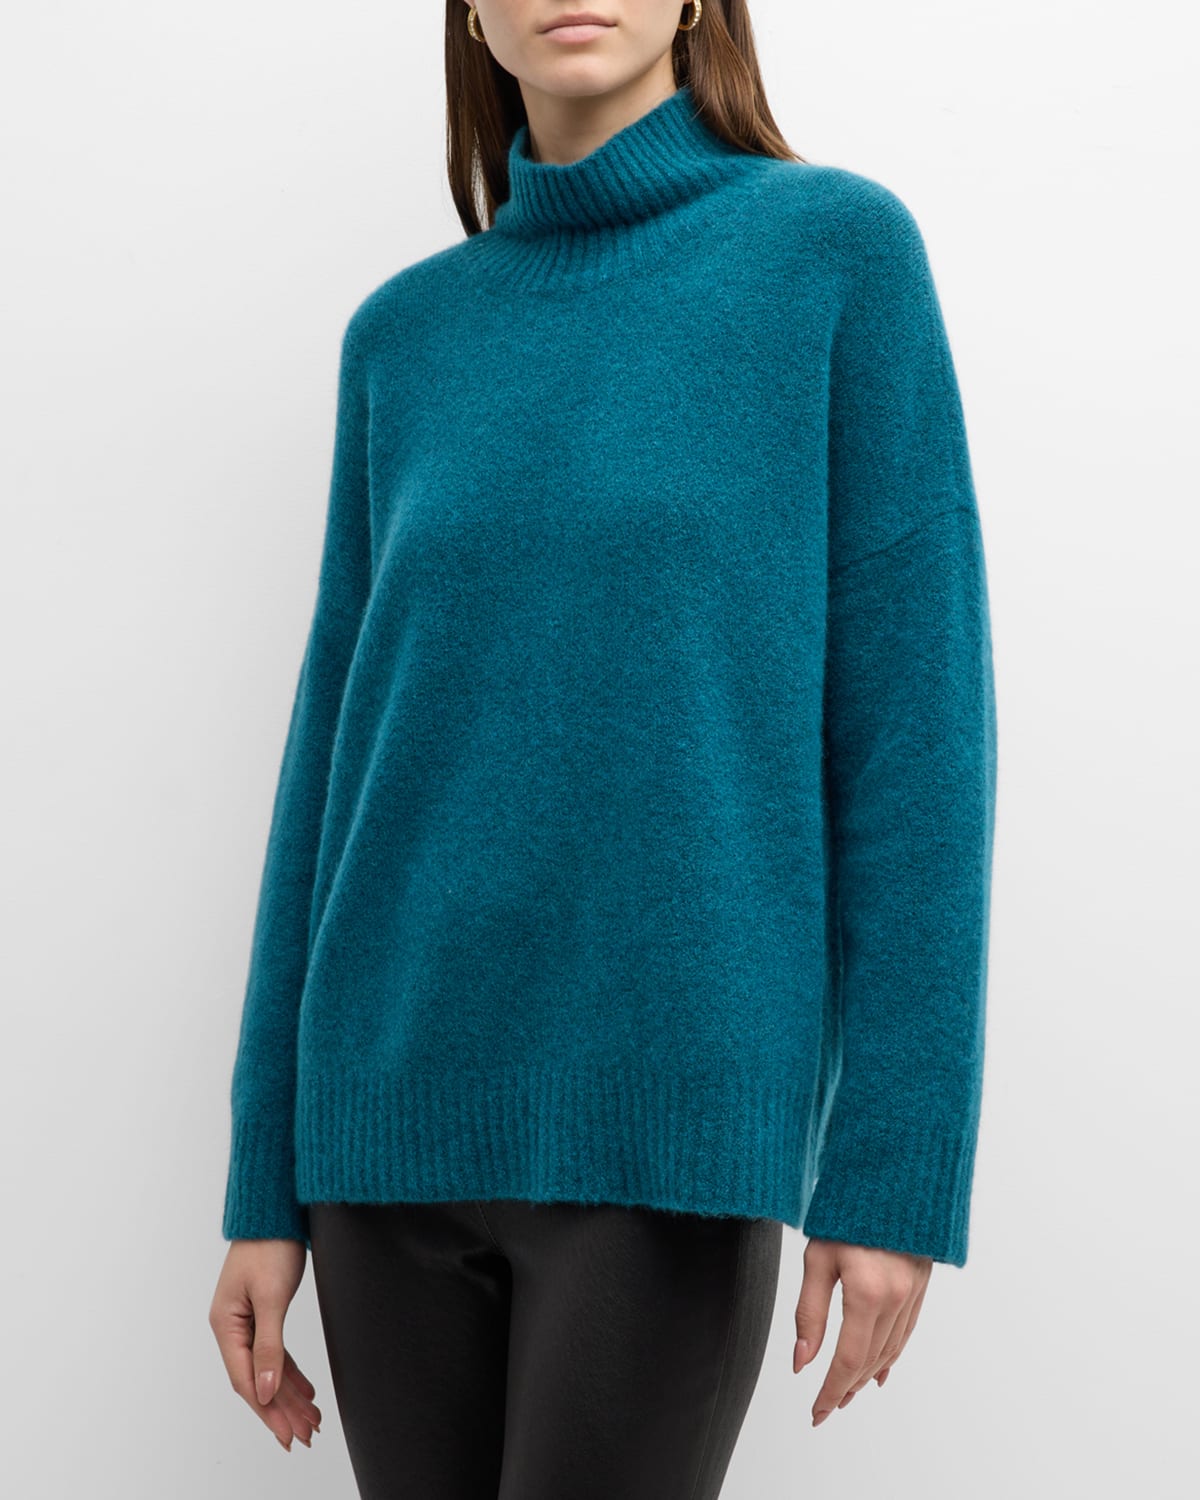 EILEEN FISHER MISSY CASHMERE SILK BOUCLE BLISS SWEATER